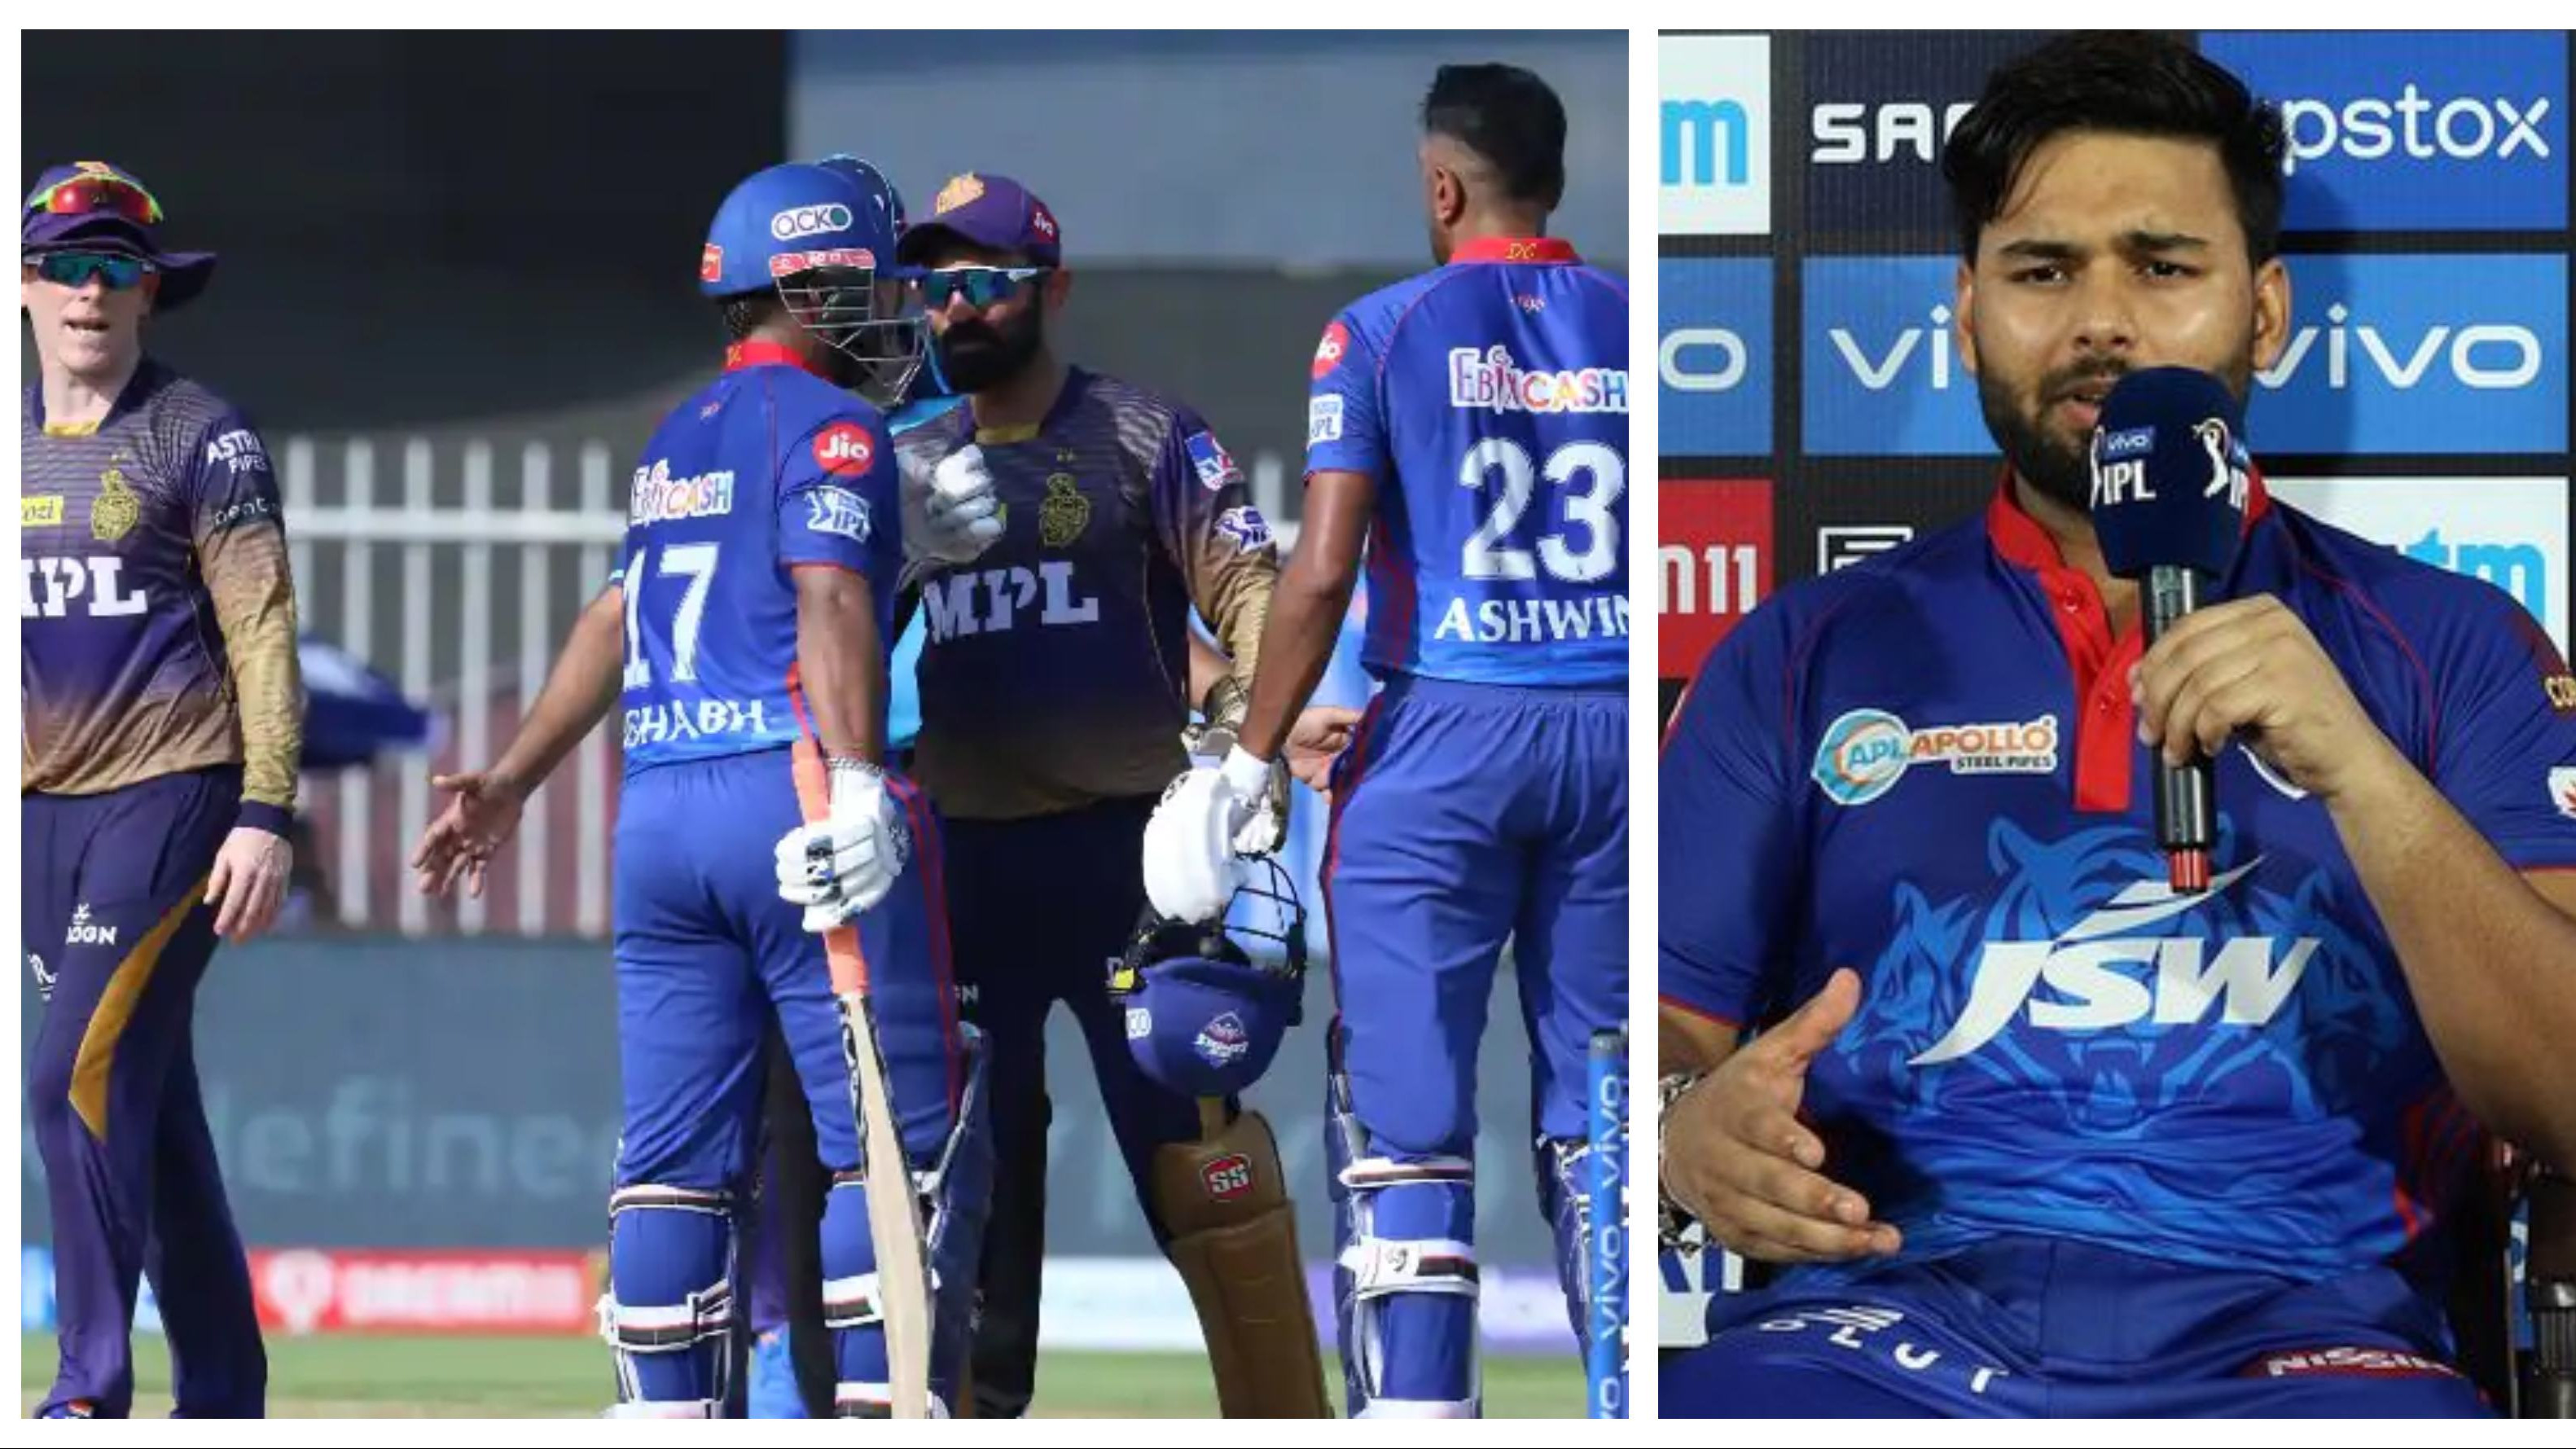 IPL 2021: ‘It is part and parcel of the game’, Rishabh Pant on Morgan and Ashwin’s on-field altercation